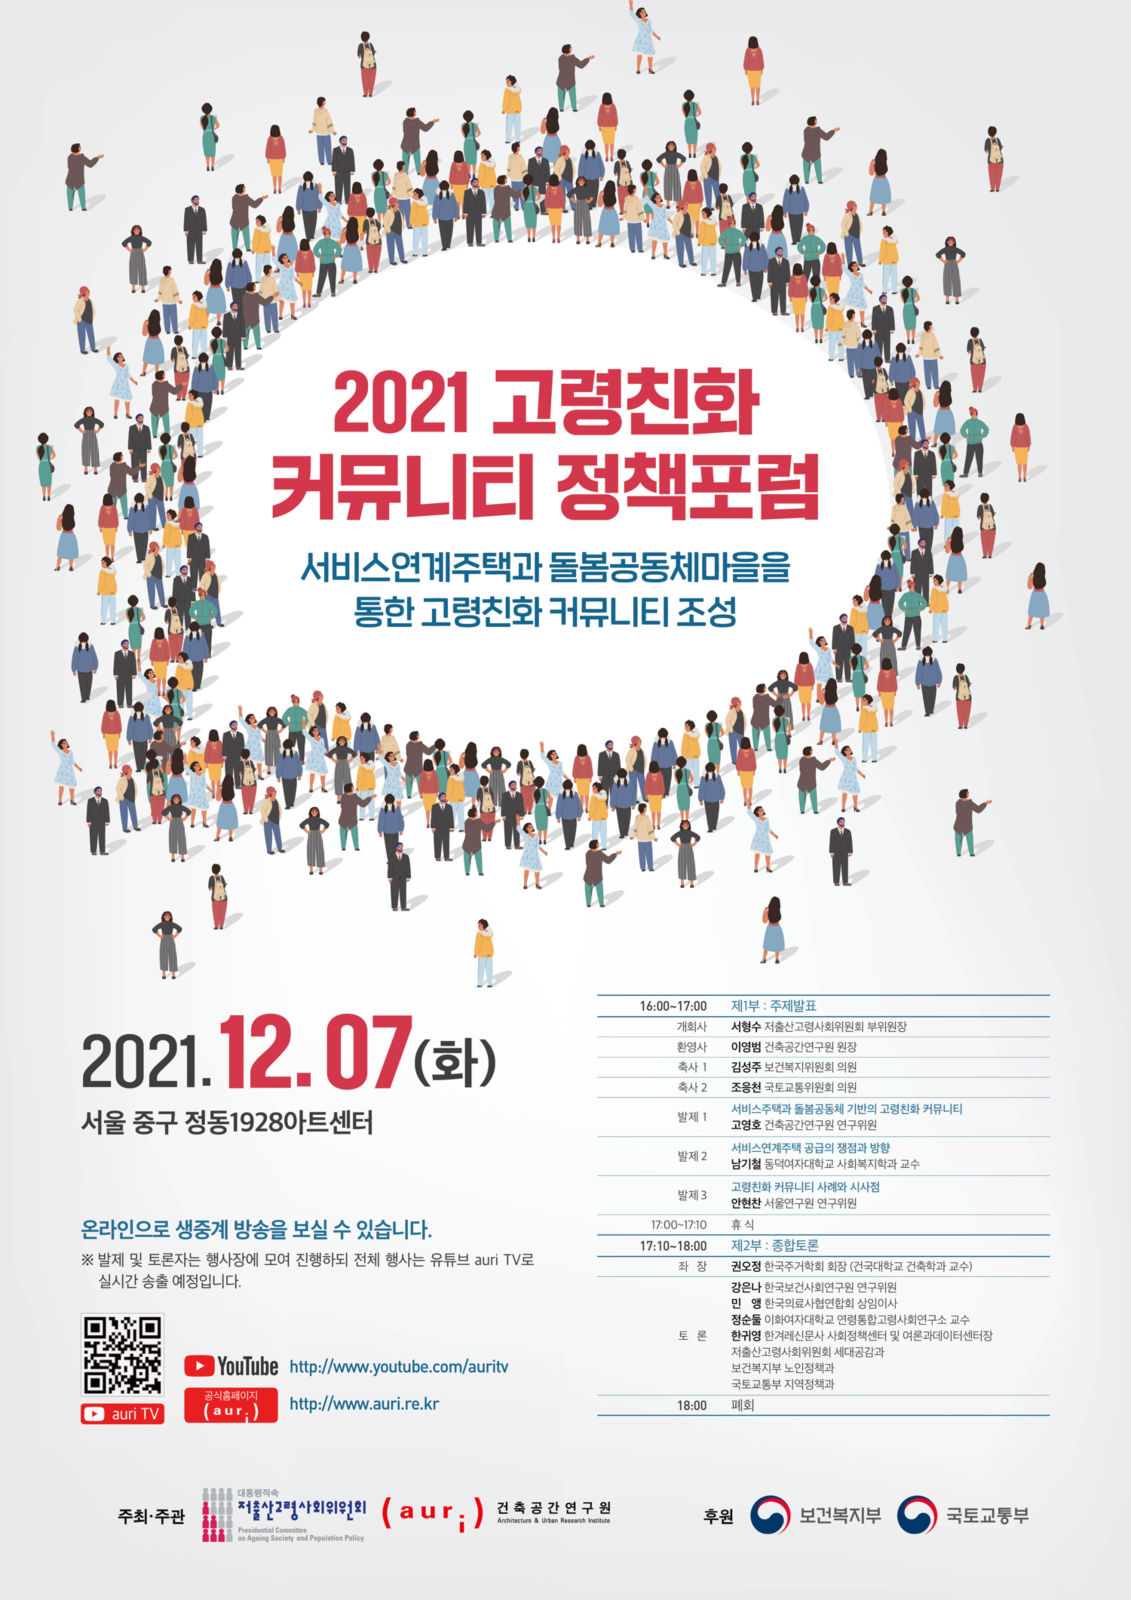 You are currently viewing 2021 고령친화 커뮤니티 정책포럼 개최